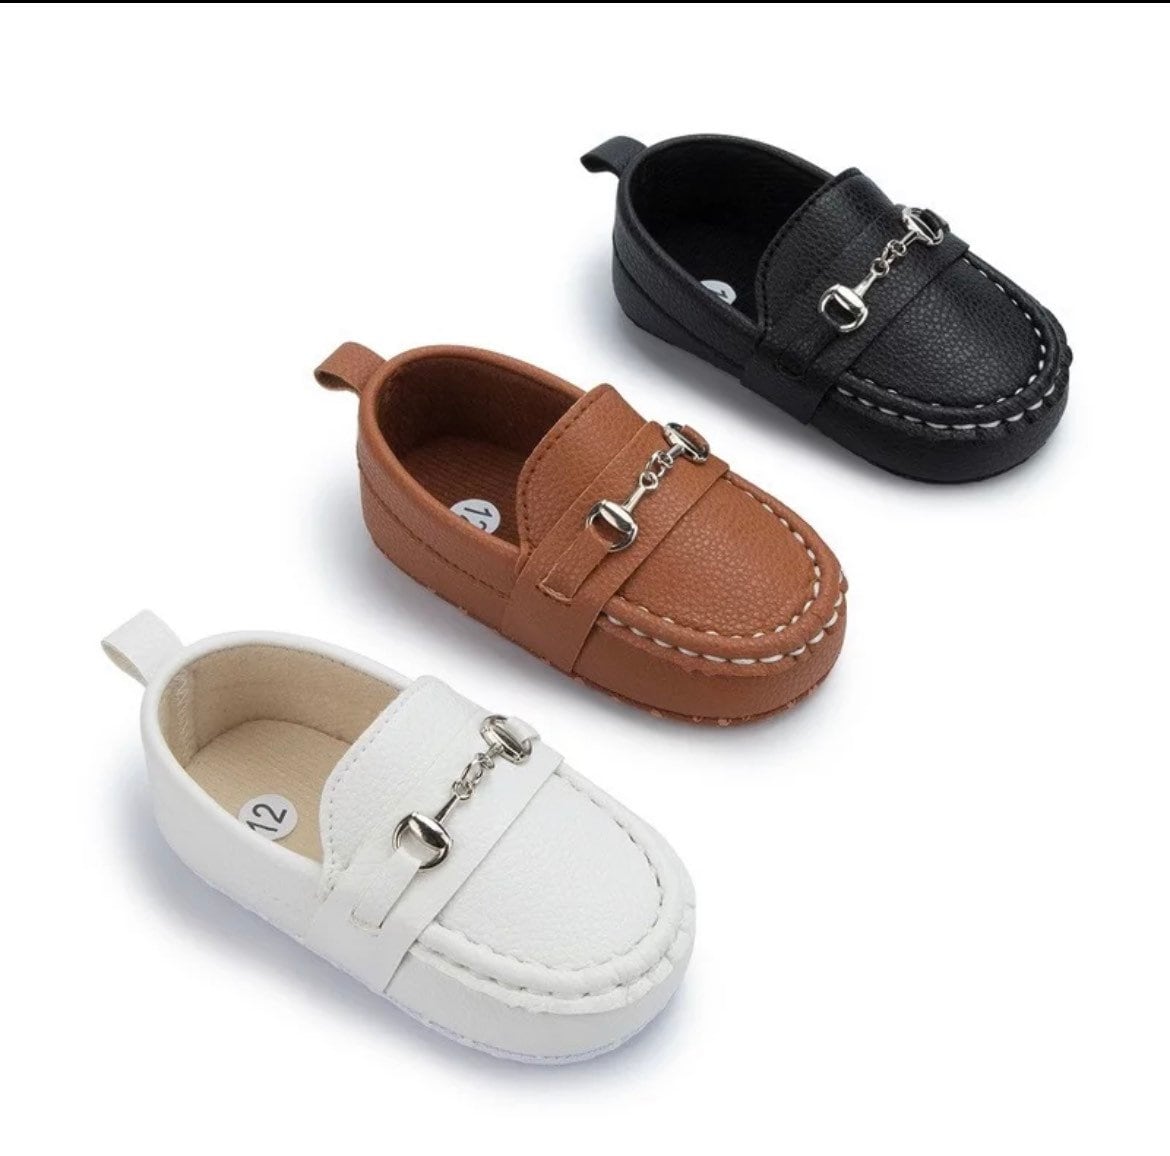 Boys Moccasin Loafers -  White-
Welcome! Thanks for looking in our shop and viewing these beautiful handcrafted baby shoes.Our high quality first walker shoes are durable &amp; super cute on baby’-Bijou Bubs